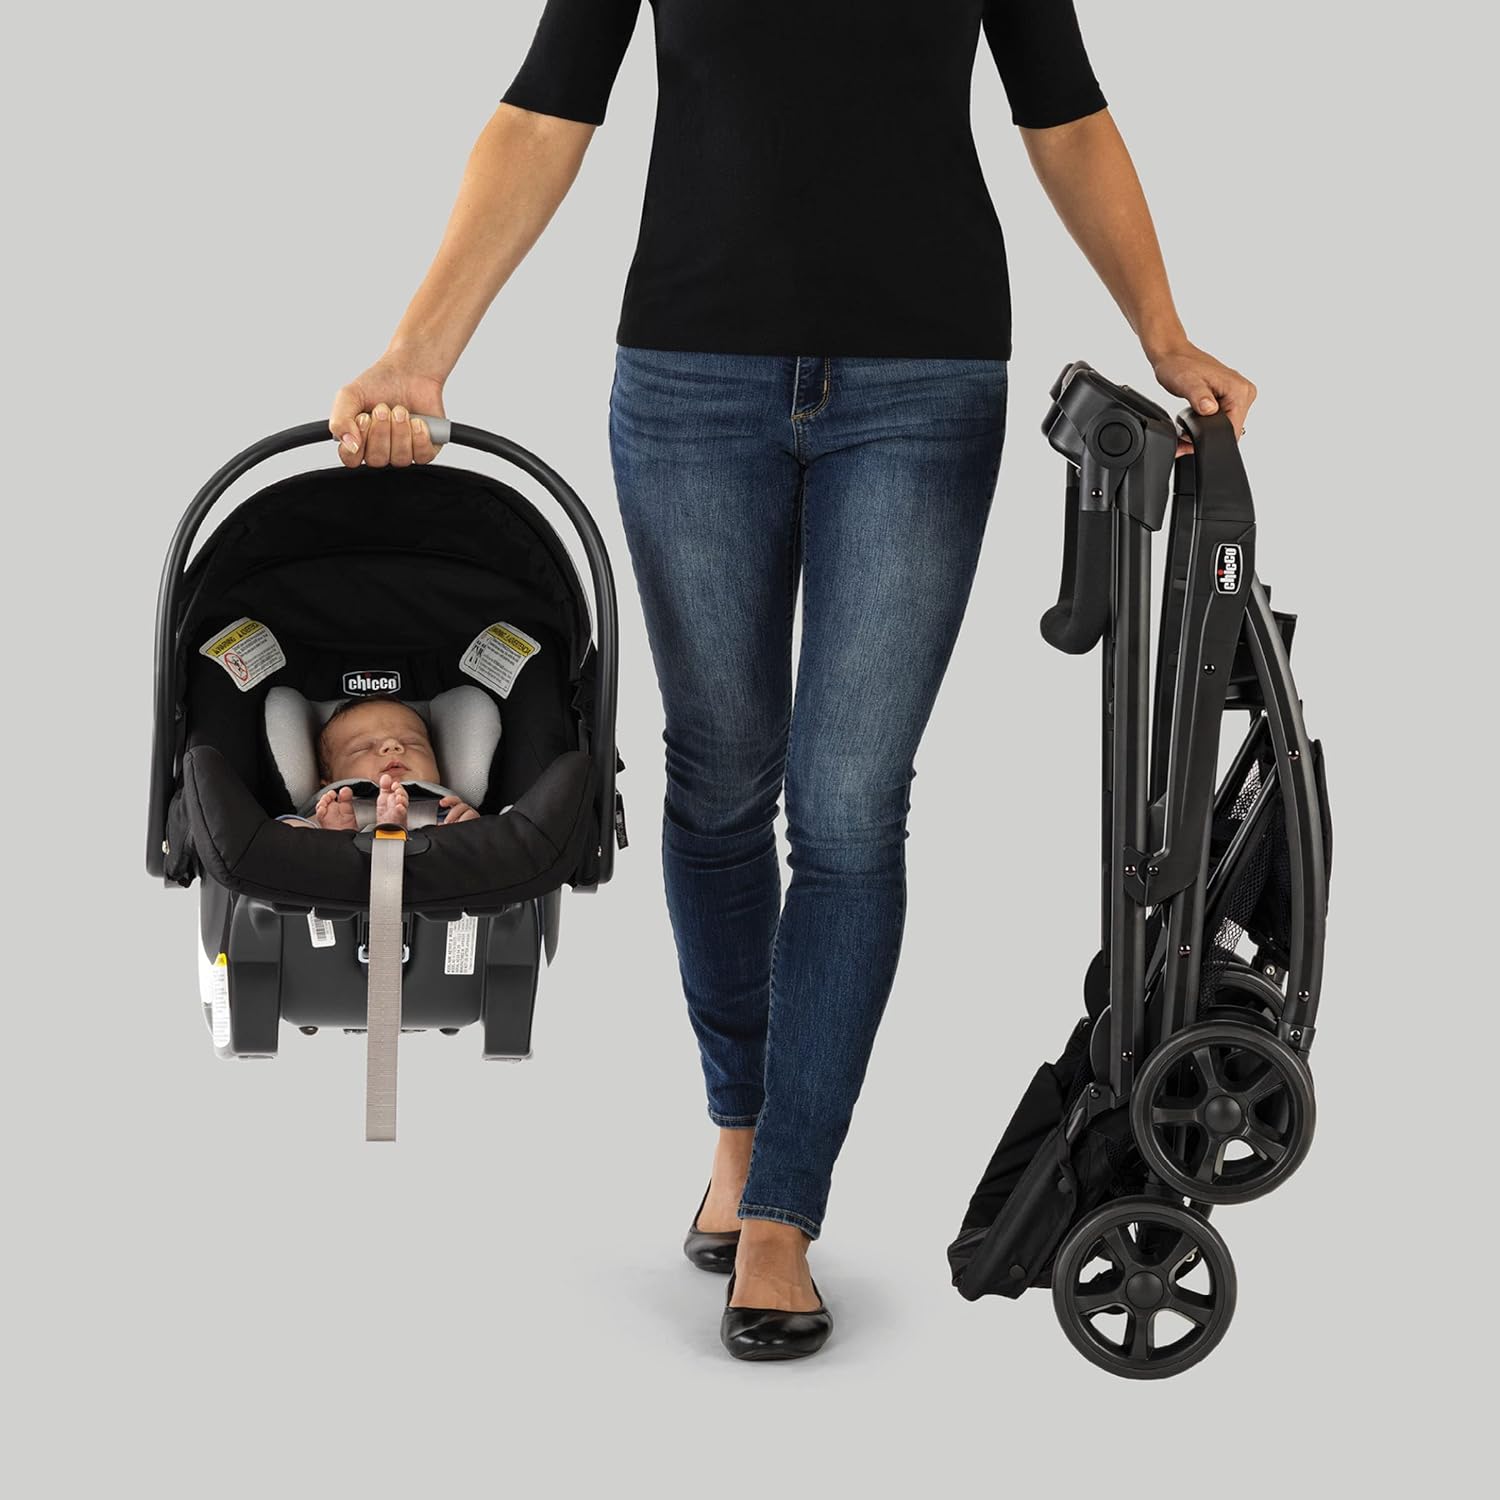 Chicco KeyFit Caddy Frame Stroller Accepts All Chicco Infant Car Seats